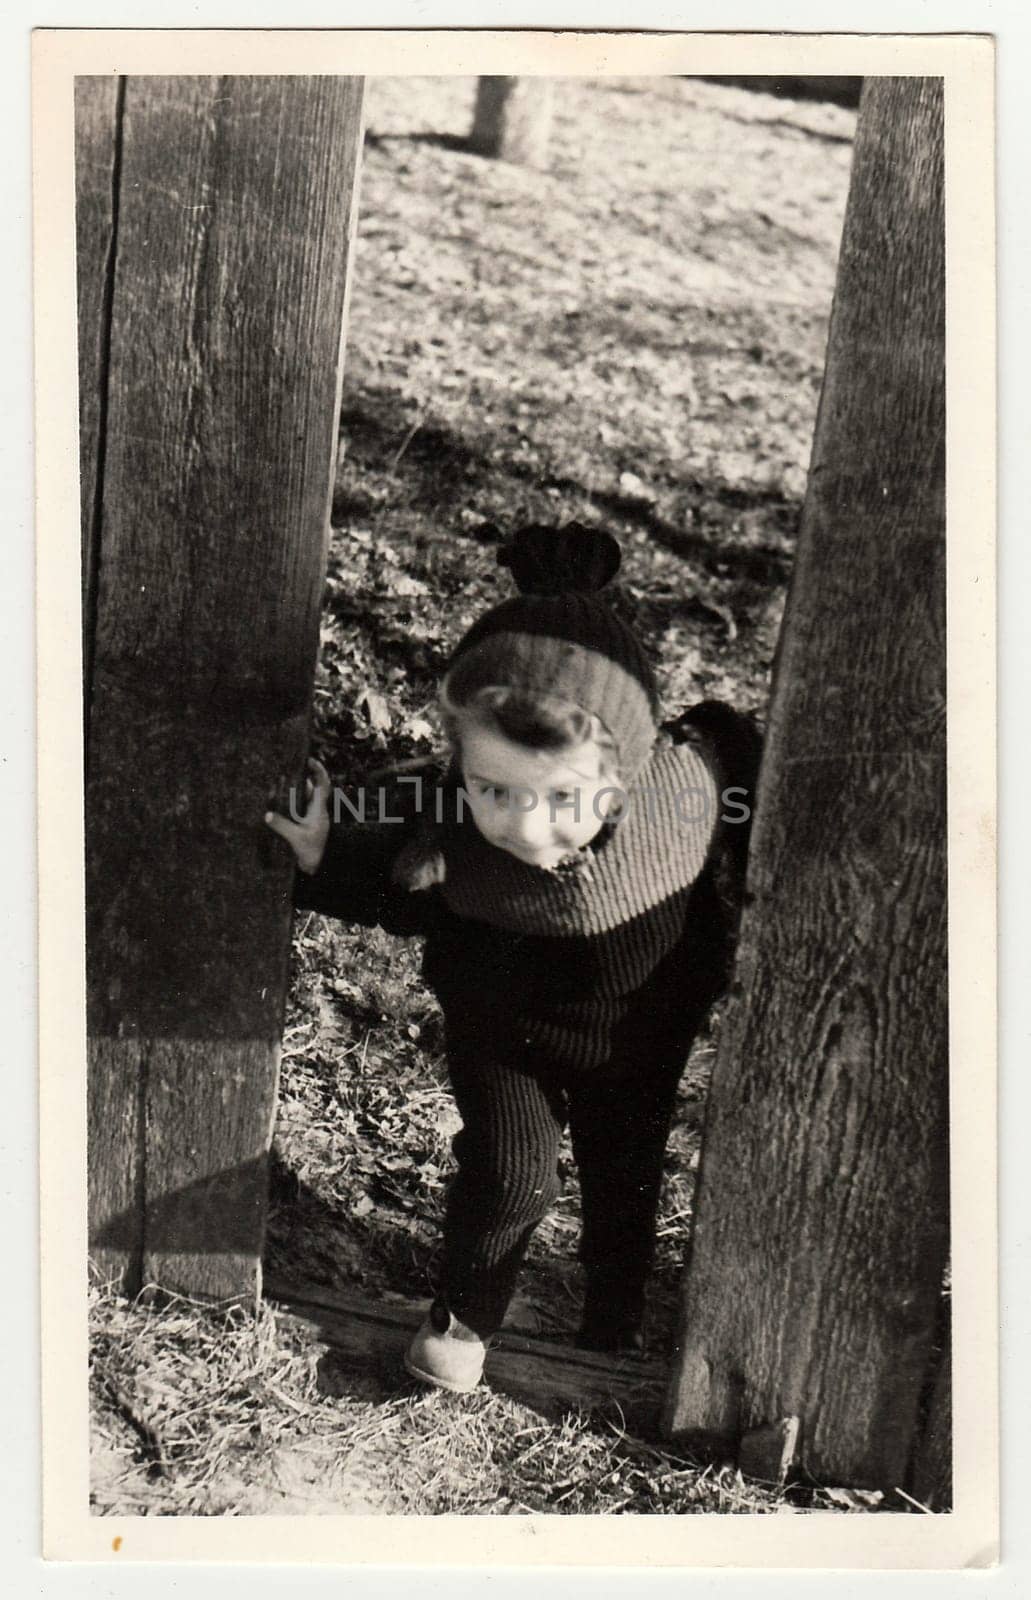 A vintage photo shows small girl goes through the hole in wooden fence. by roman_nerud